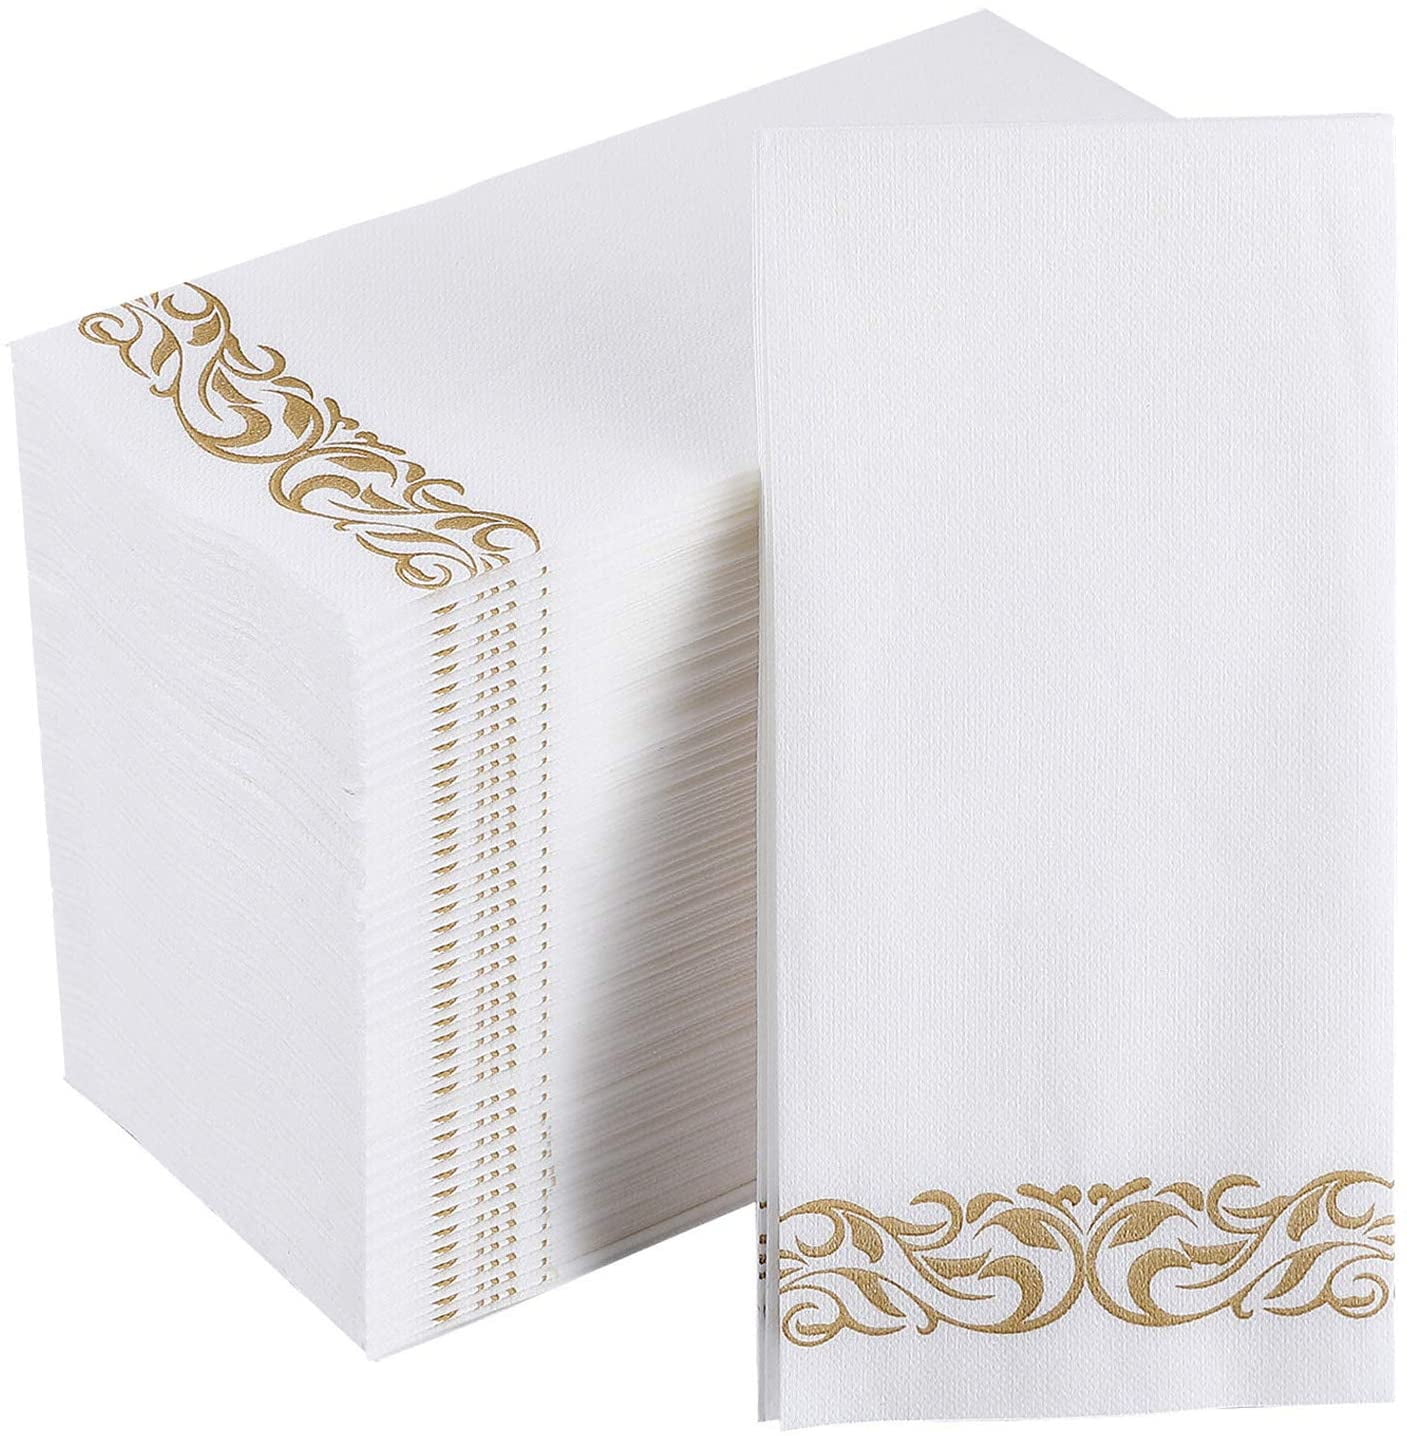 Weddings Hand Towels Parties Ivory Napkins 50 Pack Dinners Or Events Soft Absorbent Linen Feel Guest Disposable Cloth Like Paper Dinner Napkins Paper Hand Napkins for Kitchen Bathroom 